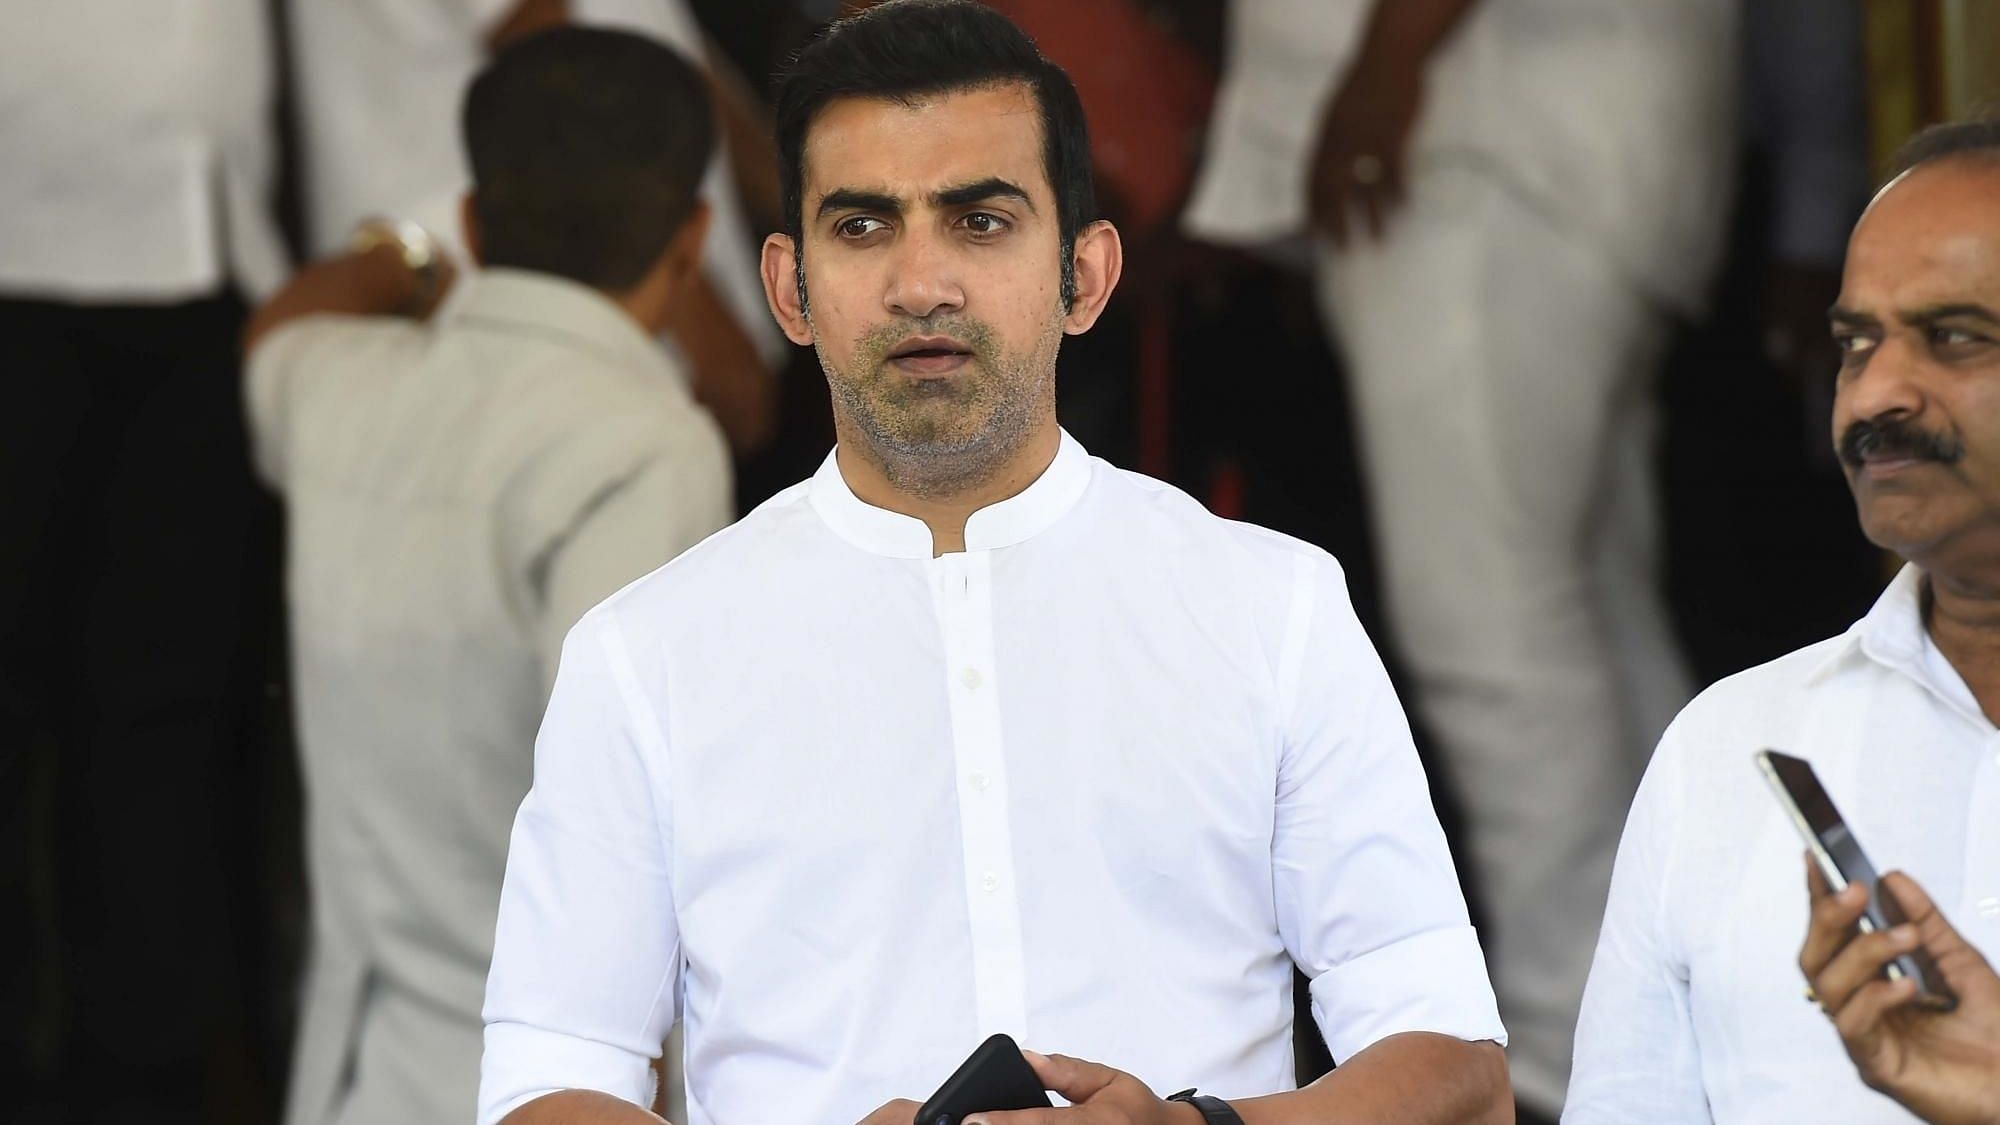 Apart from the Rs 1 crore, Gautam Gambhir also donated his one month’s salary to the central relief fund.